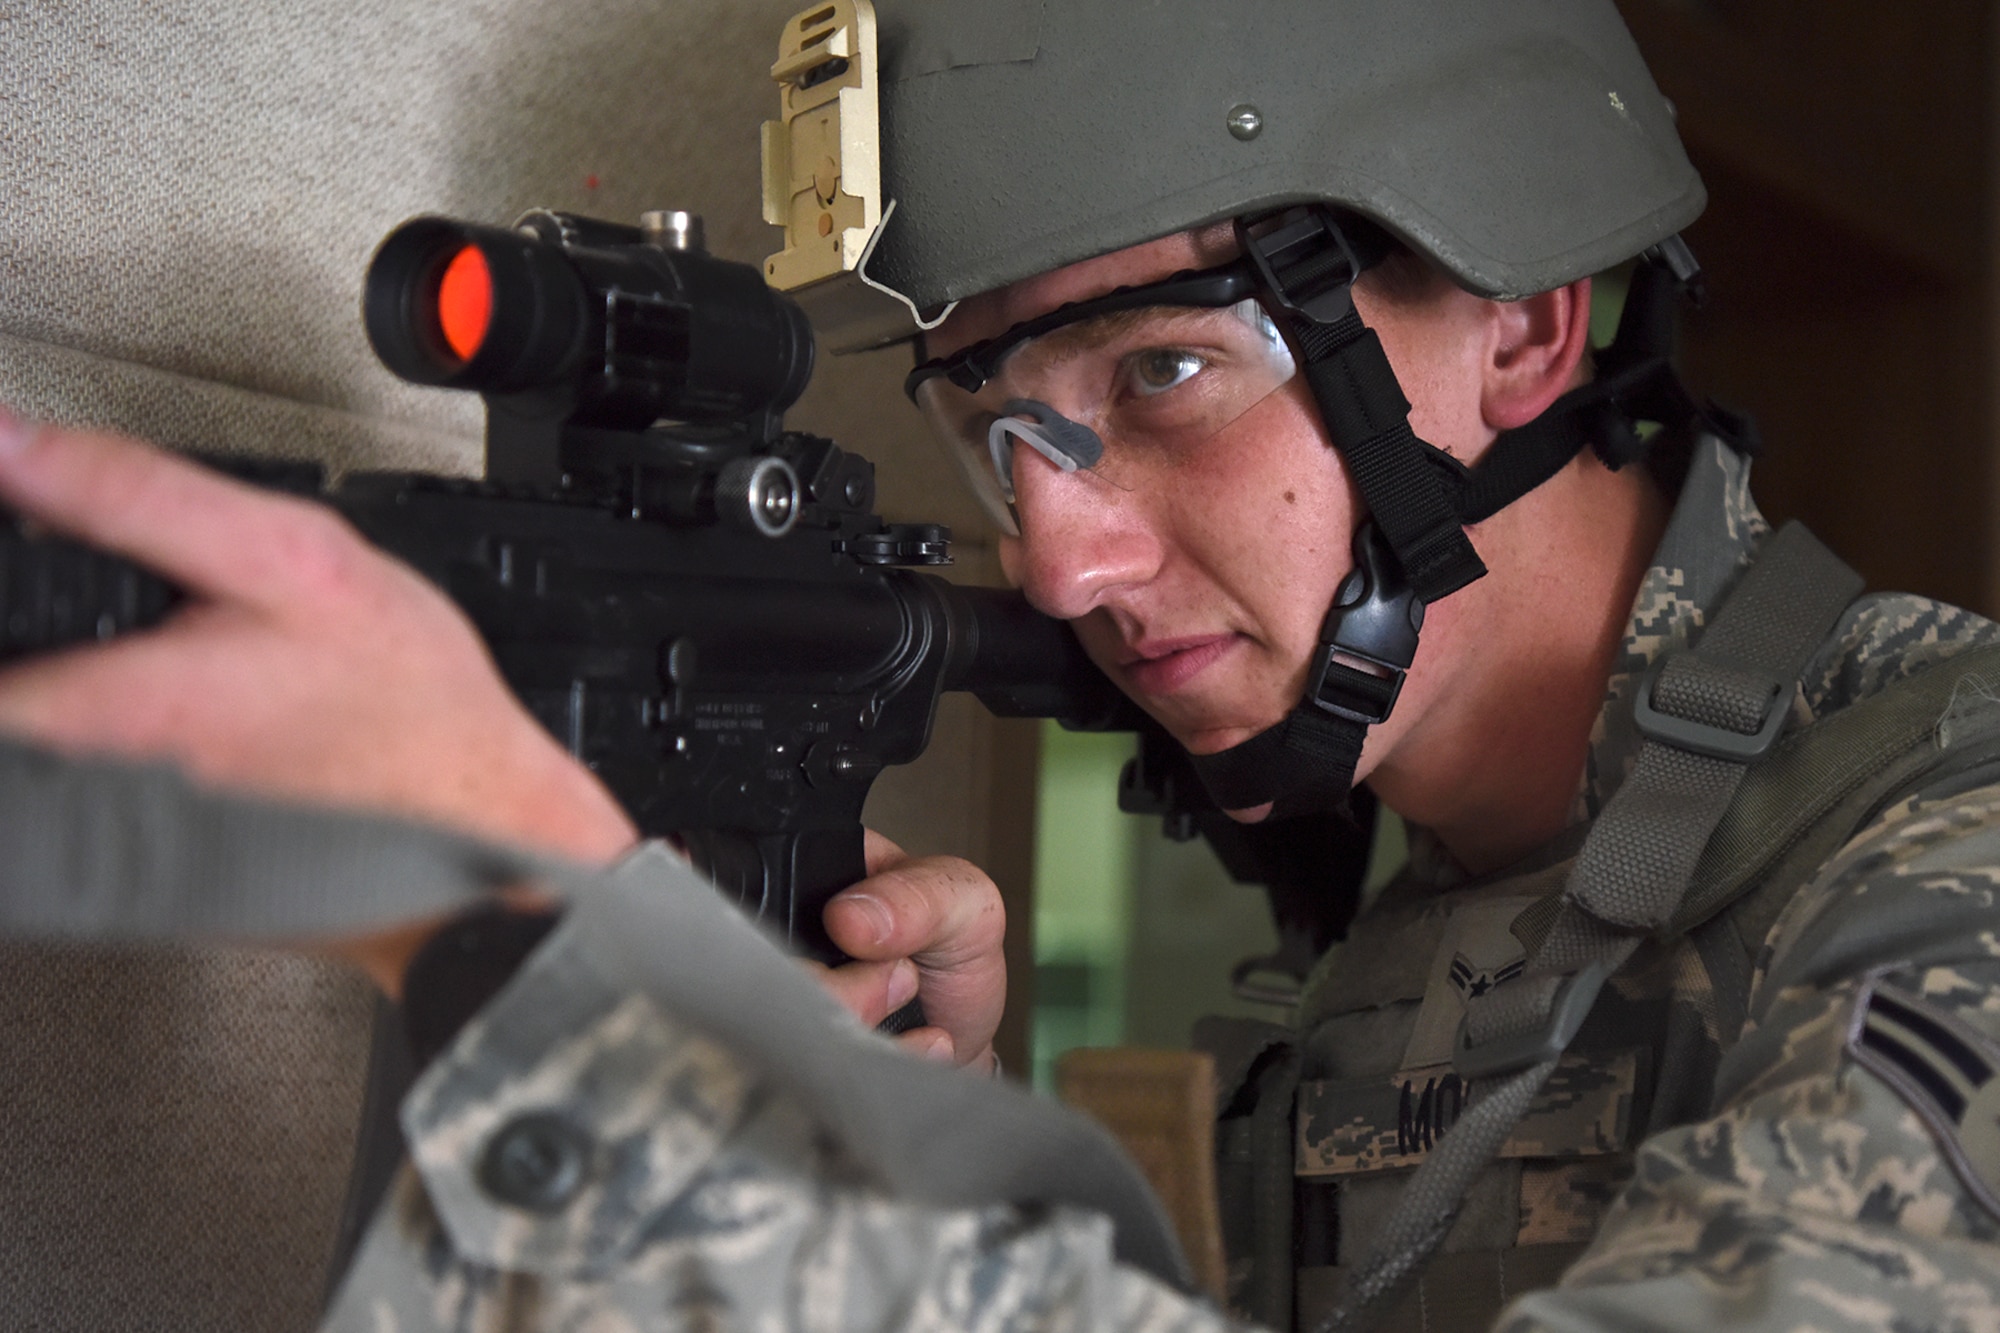 Airman 1st Class Cornelis Mol, 8th Security Forces Squadron 2019 Advanced Combat Skills Assessment team member, trains on clearing and breaching buildings at Kunsan Air Base, Republic of Korea, June 3, 2019. The five-person team trained for a month prior to traveling to Andersen Air Base, Guam, for the weeklong competition. (U.S. Air Force photo by Staff Sgt. Mackenzie Mendez)